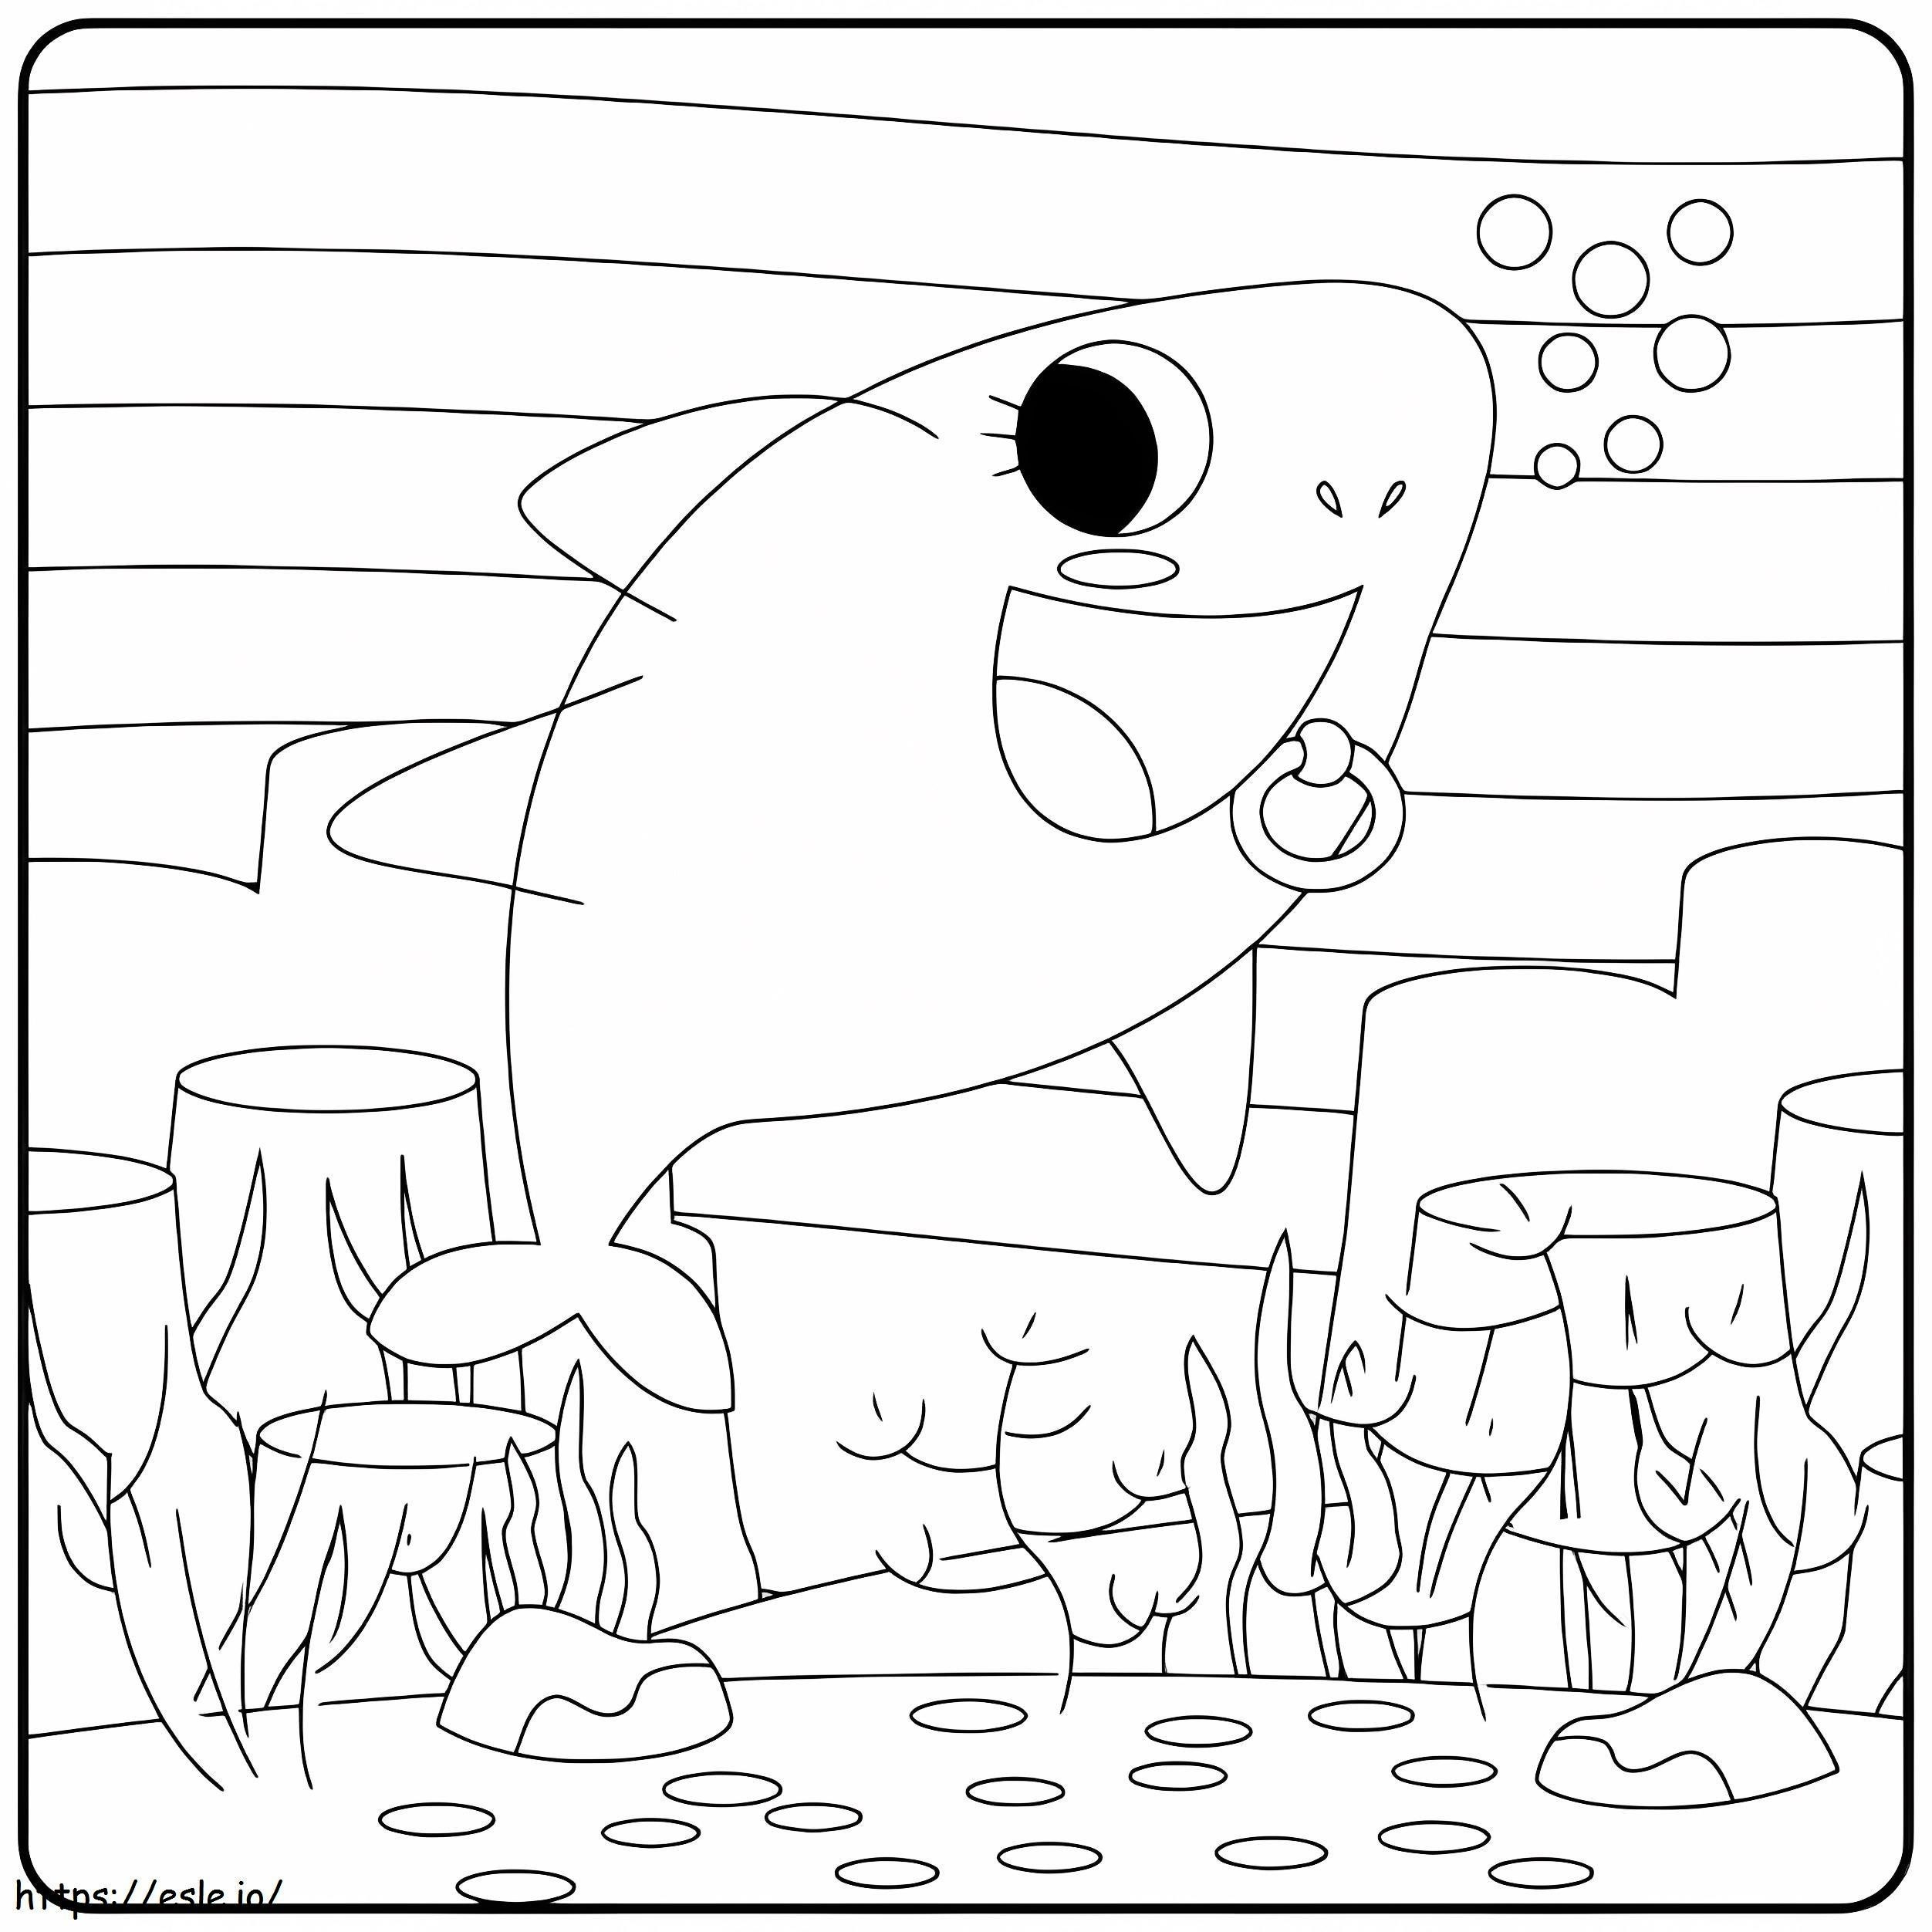 Awesome Baby Shark coloring page